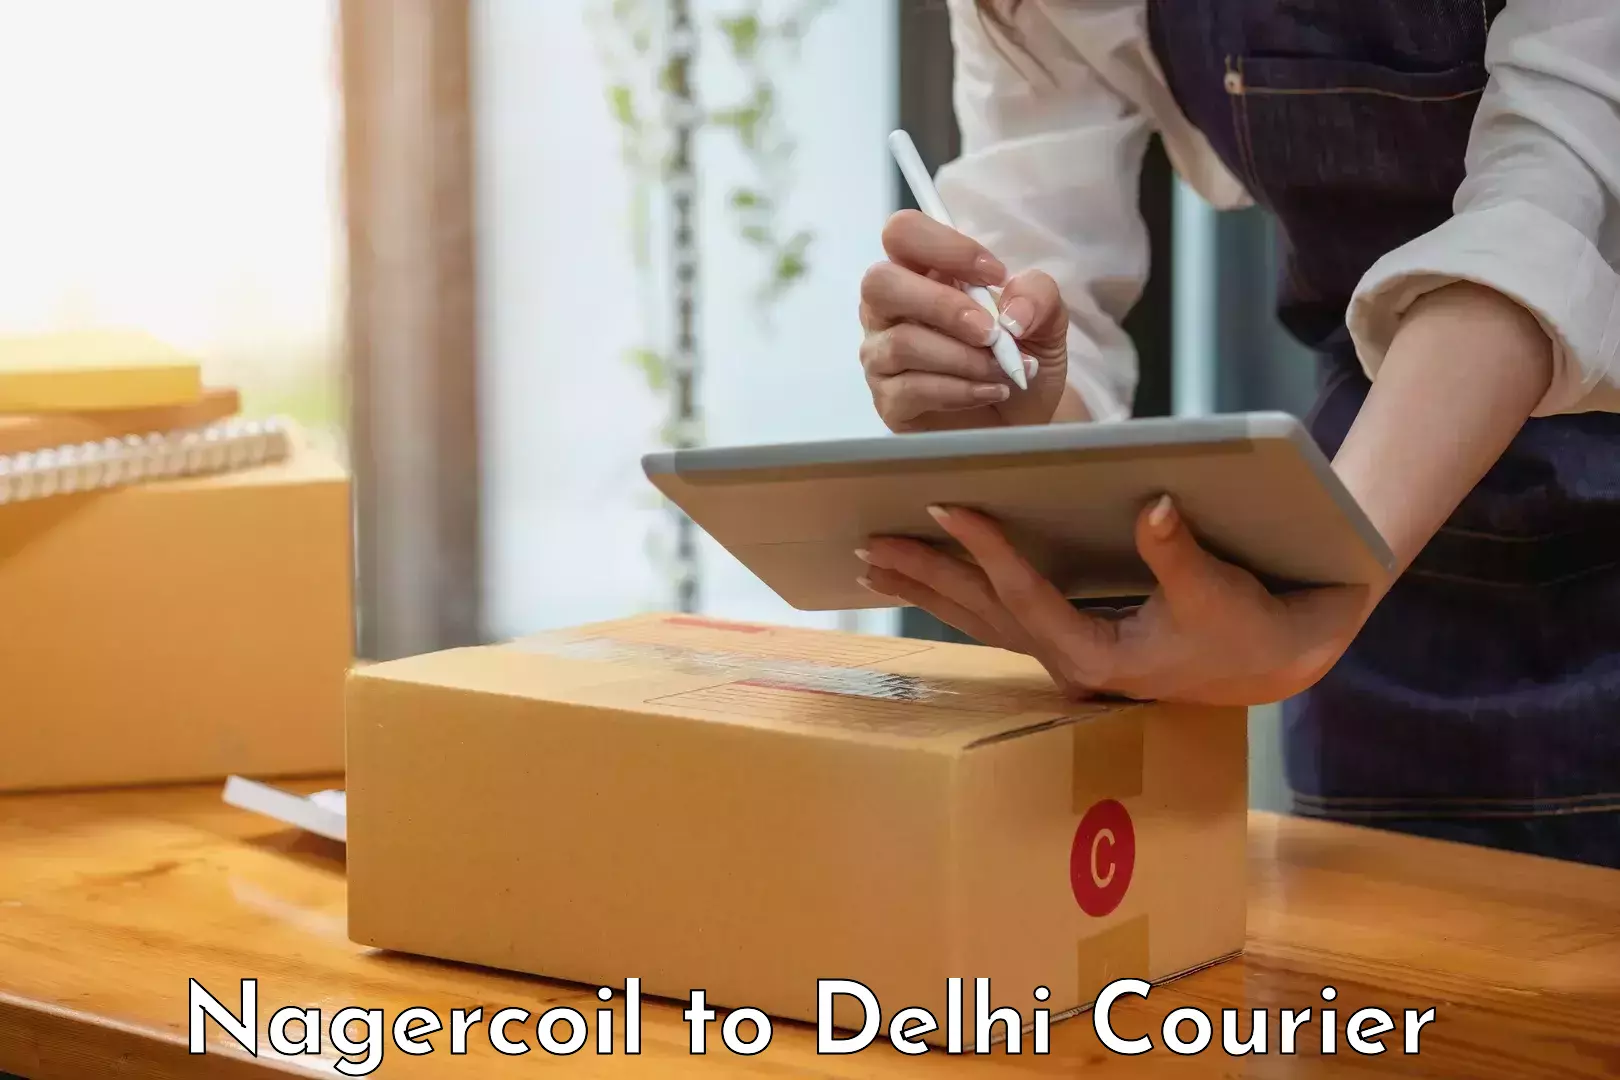 Large package courier Nagercoil to Jawaharlal Nehru University New Delhi